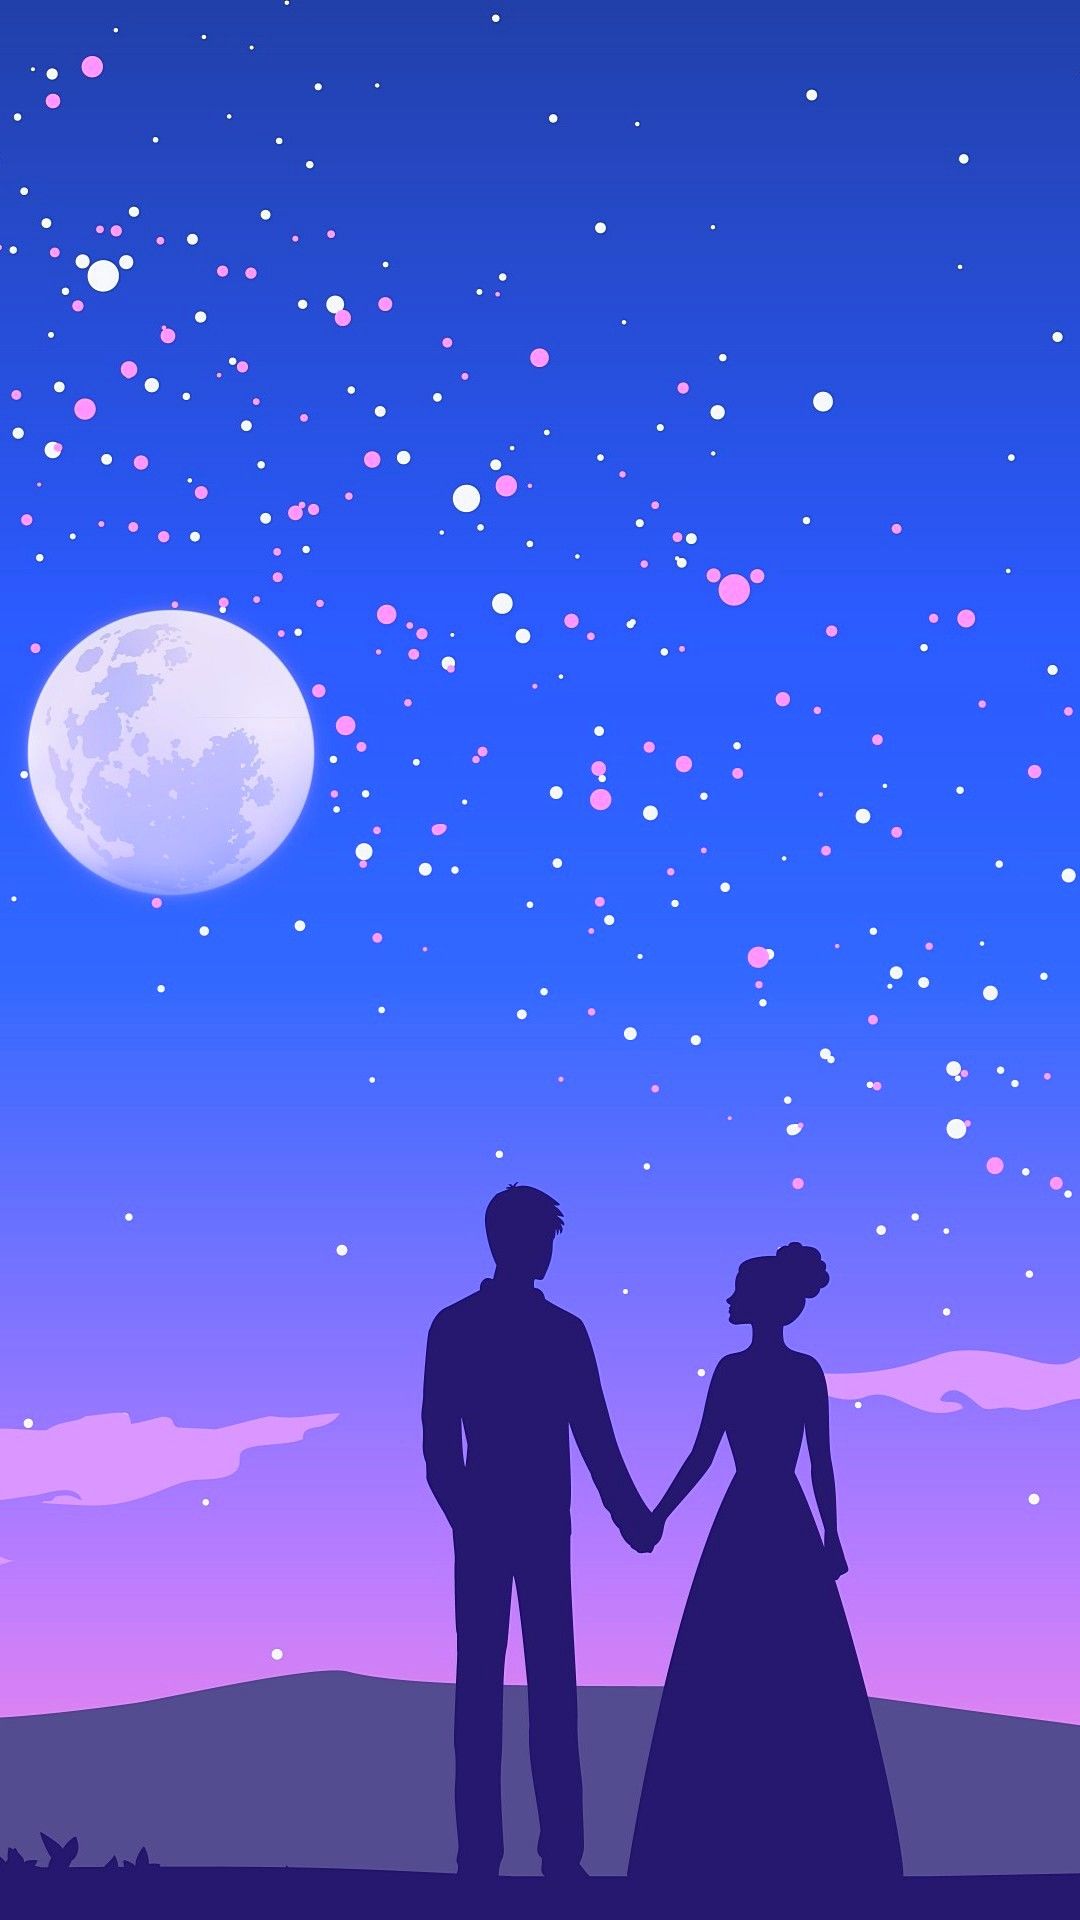 Hd Wallpaper Couple For Mobile